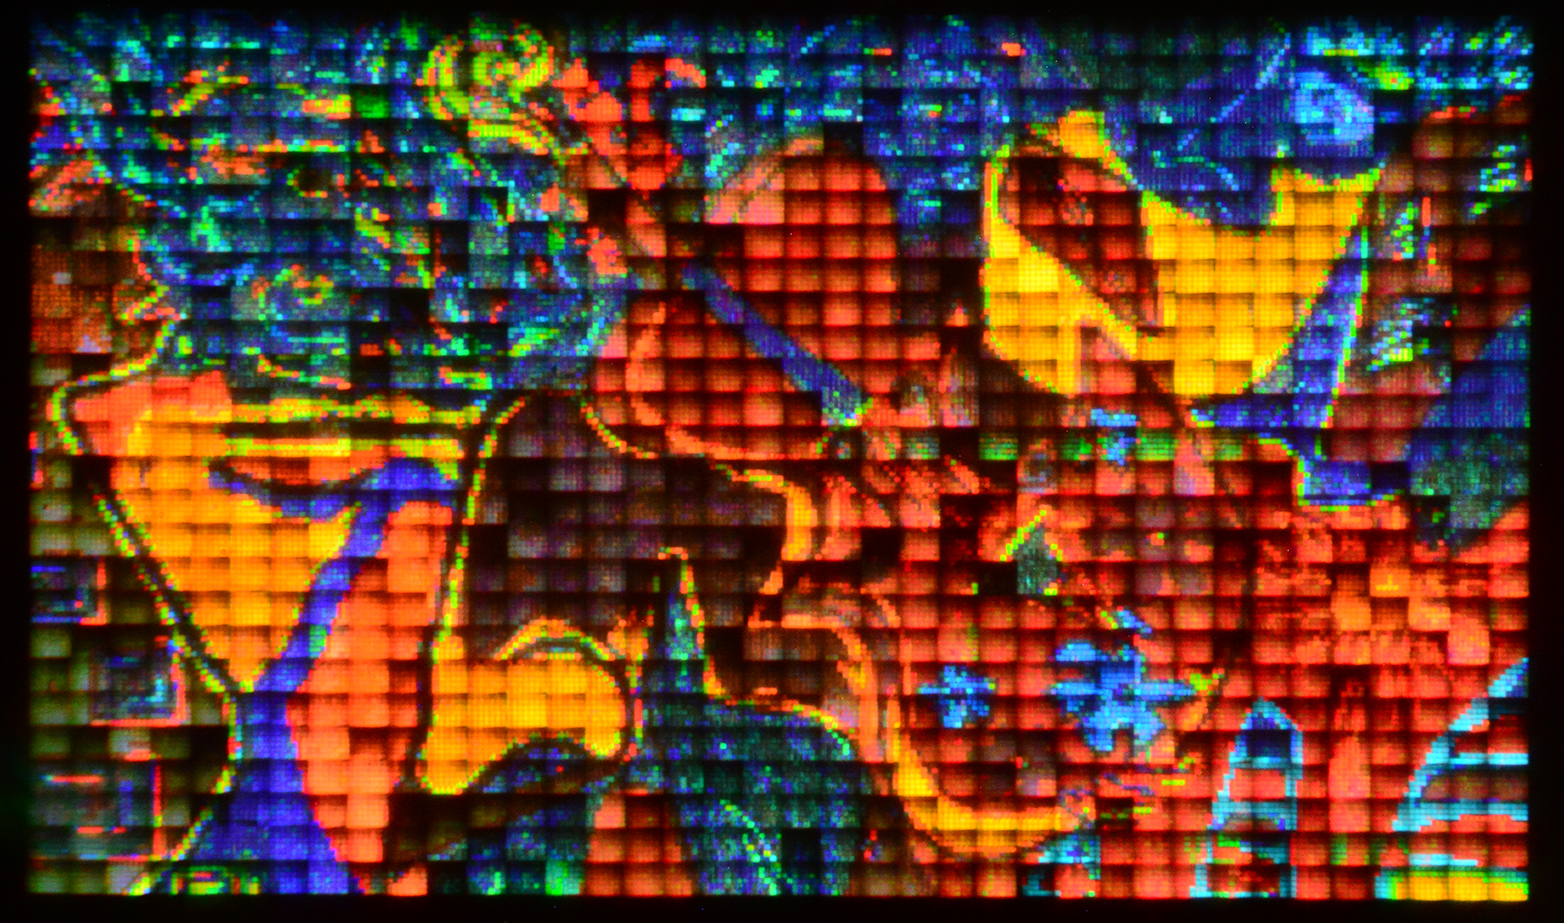 Colorful squares are arranged in an abstract pattern